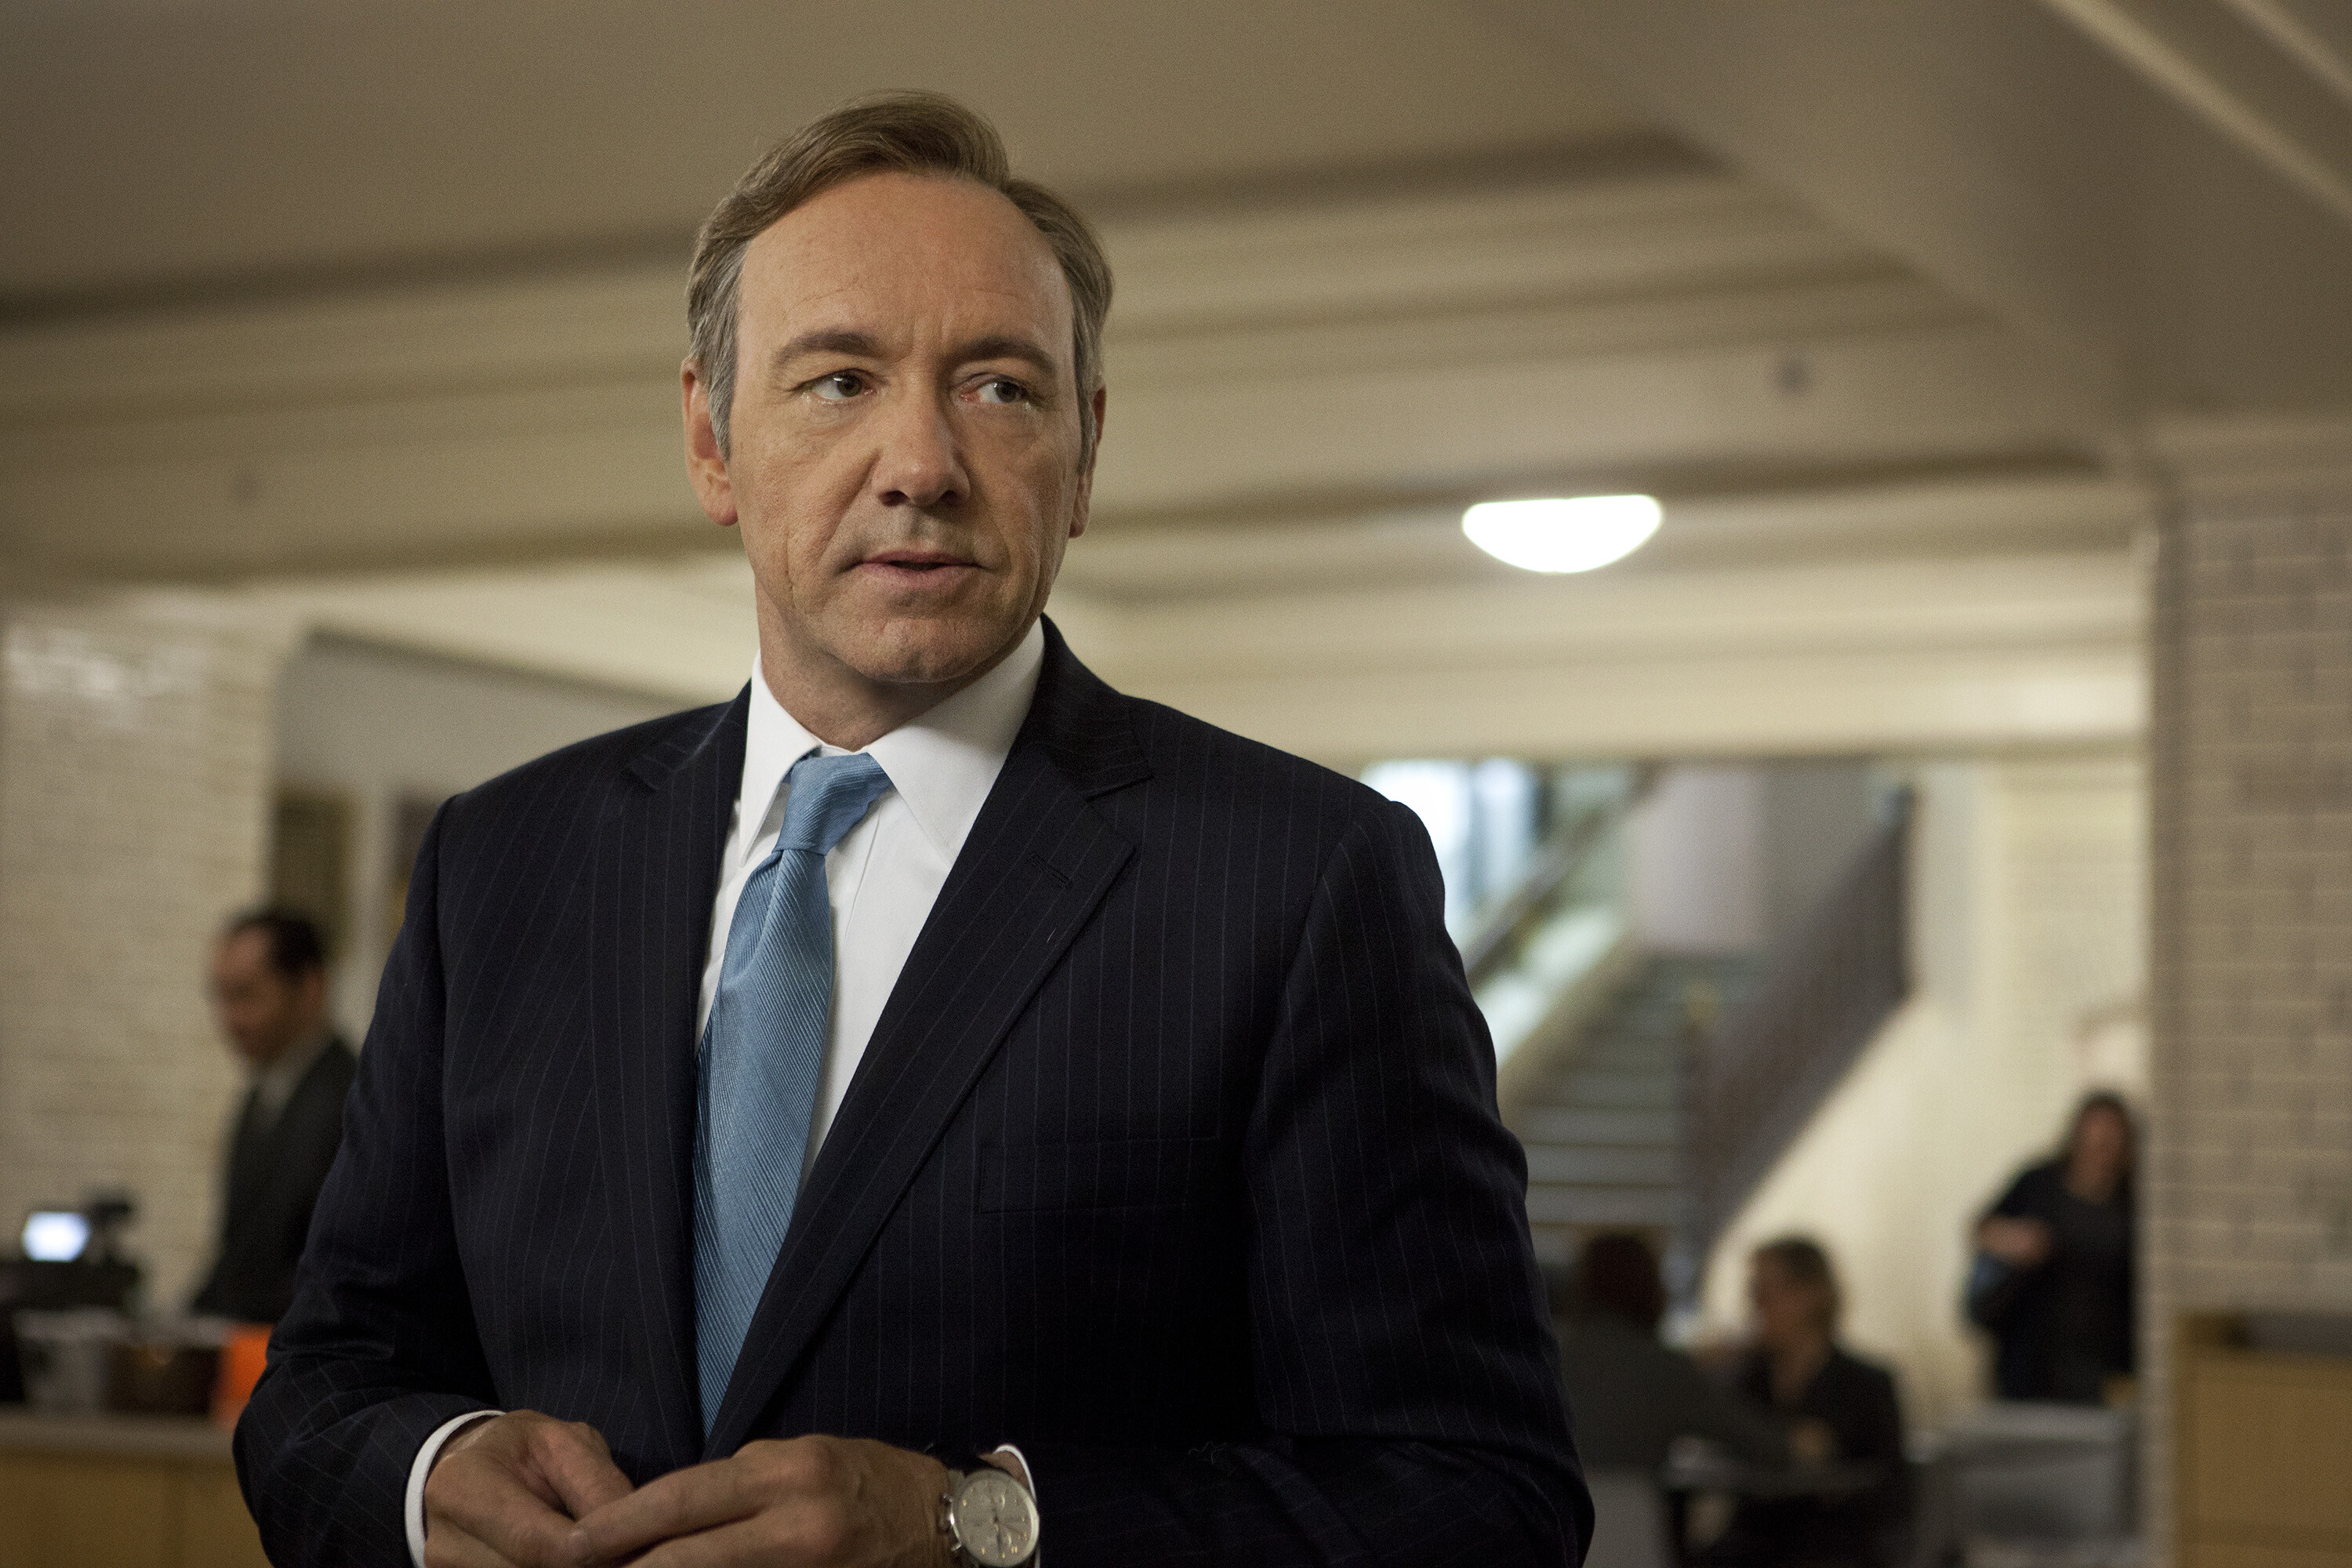 House of Cards: Kevin Spacey as Francis J. "Frank" Underwood, Netflix series. 3000x2000 HD Wallpaper.